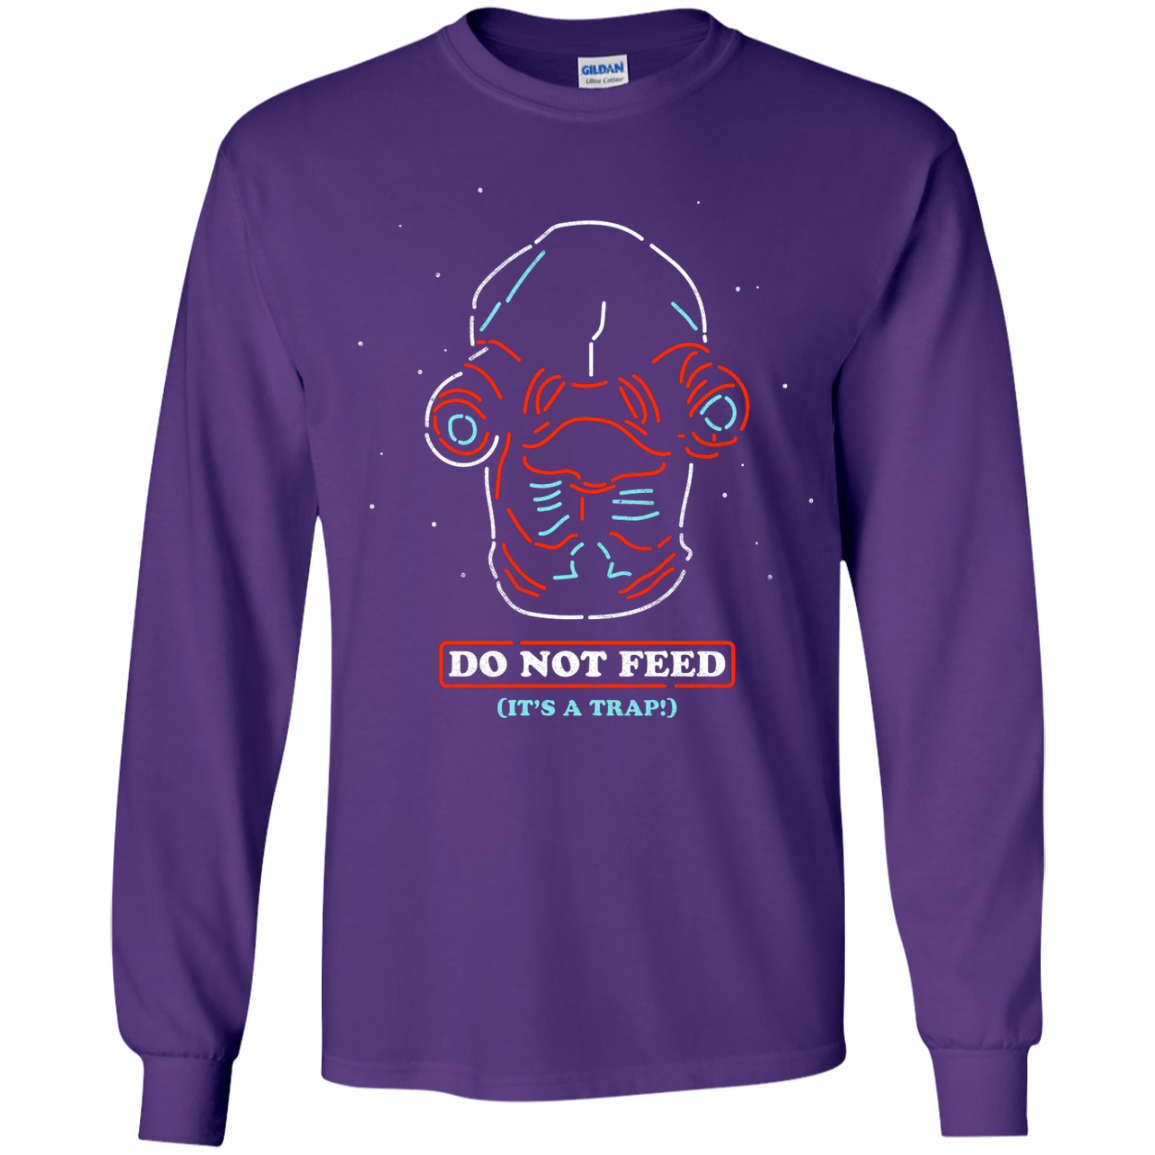 Do Not Feed Youth Long Sleeve T-Shirt